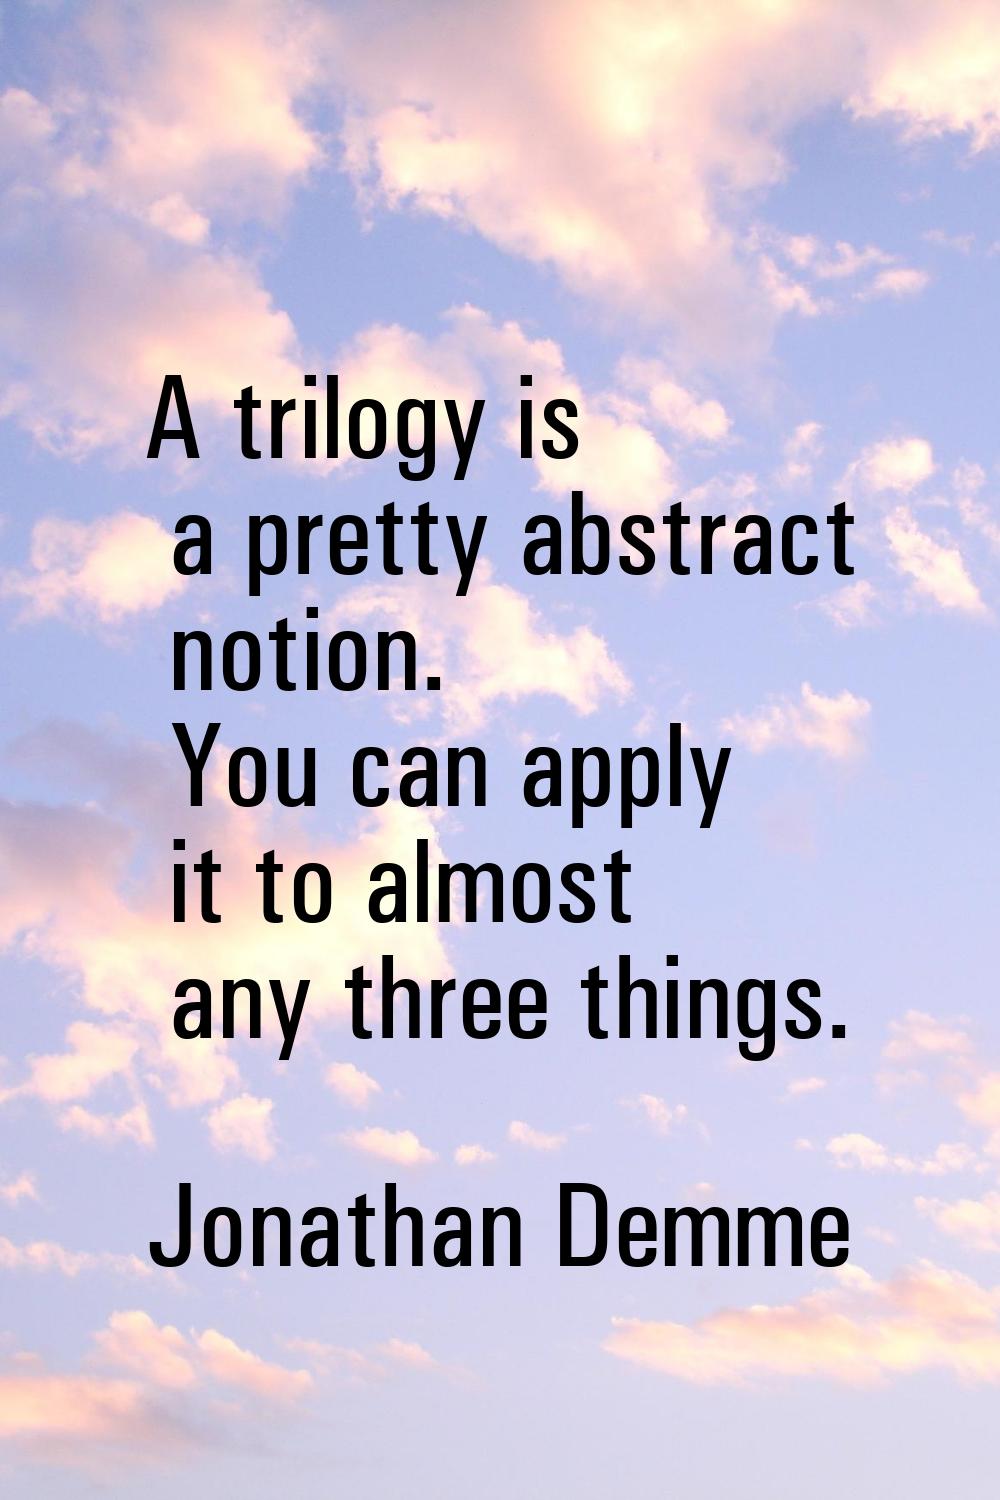 A trilogy is a pretty abstract notion. You can apply it to almost any three things.